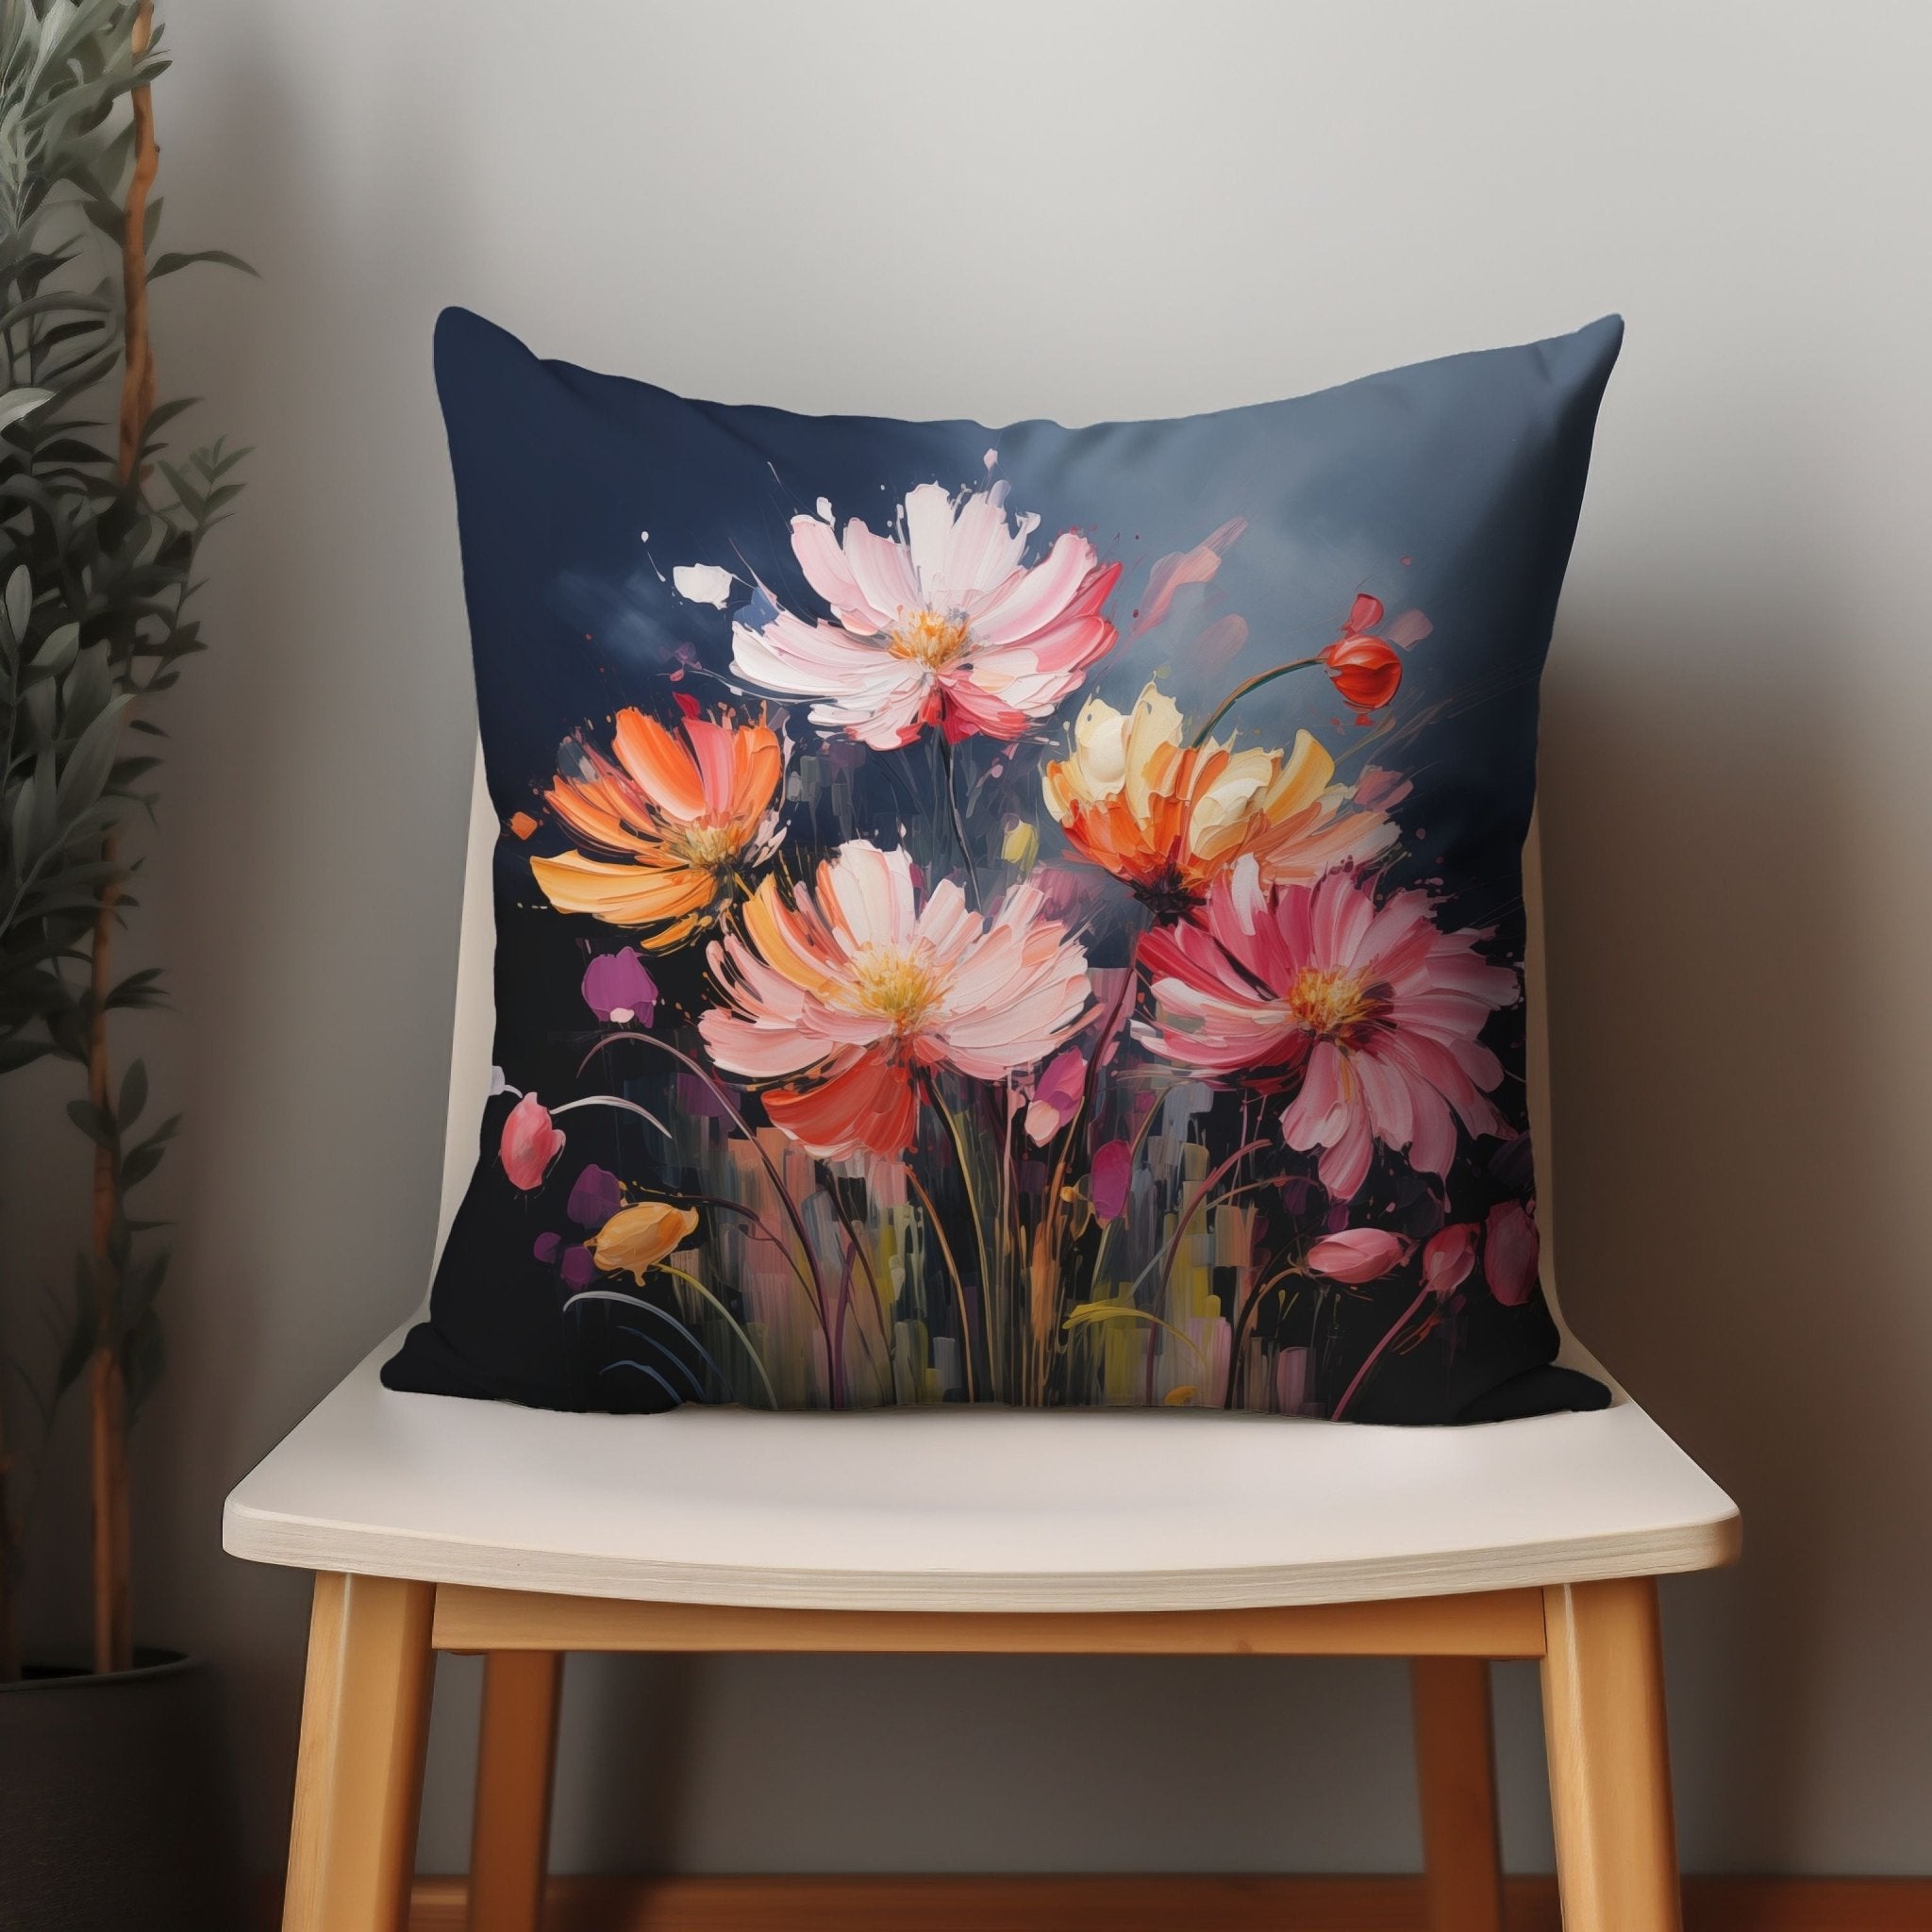 Wildflower Fireworks: Vibrant Decorative Accent Pillow & Covers - My Store